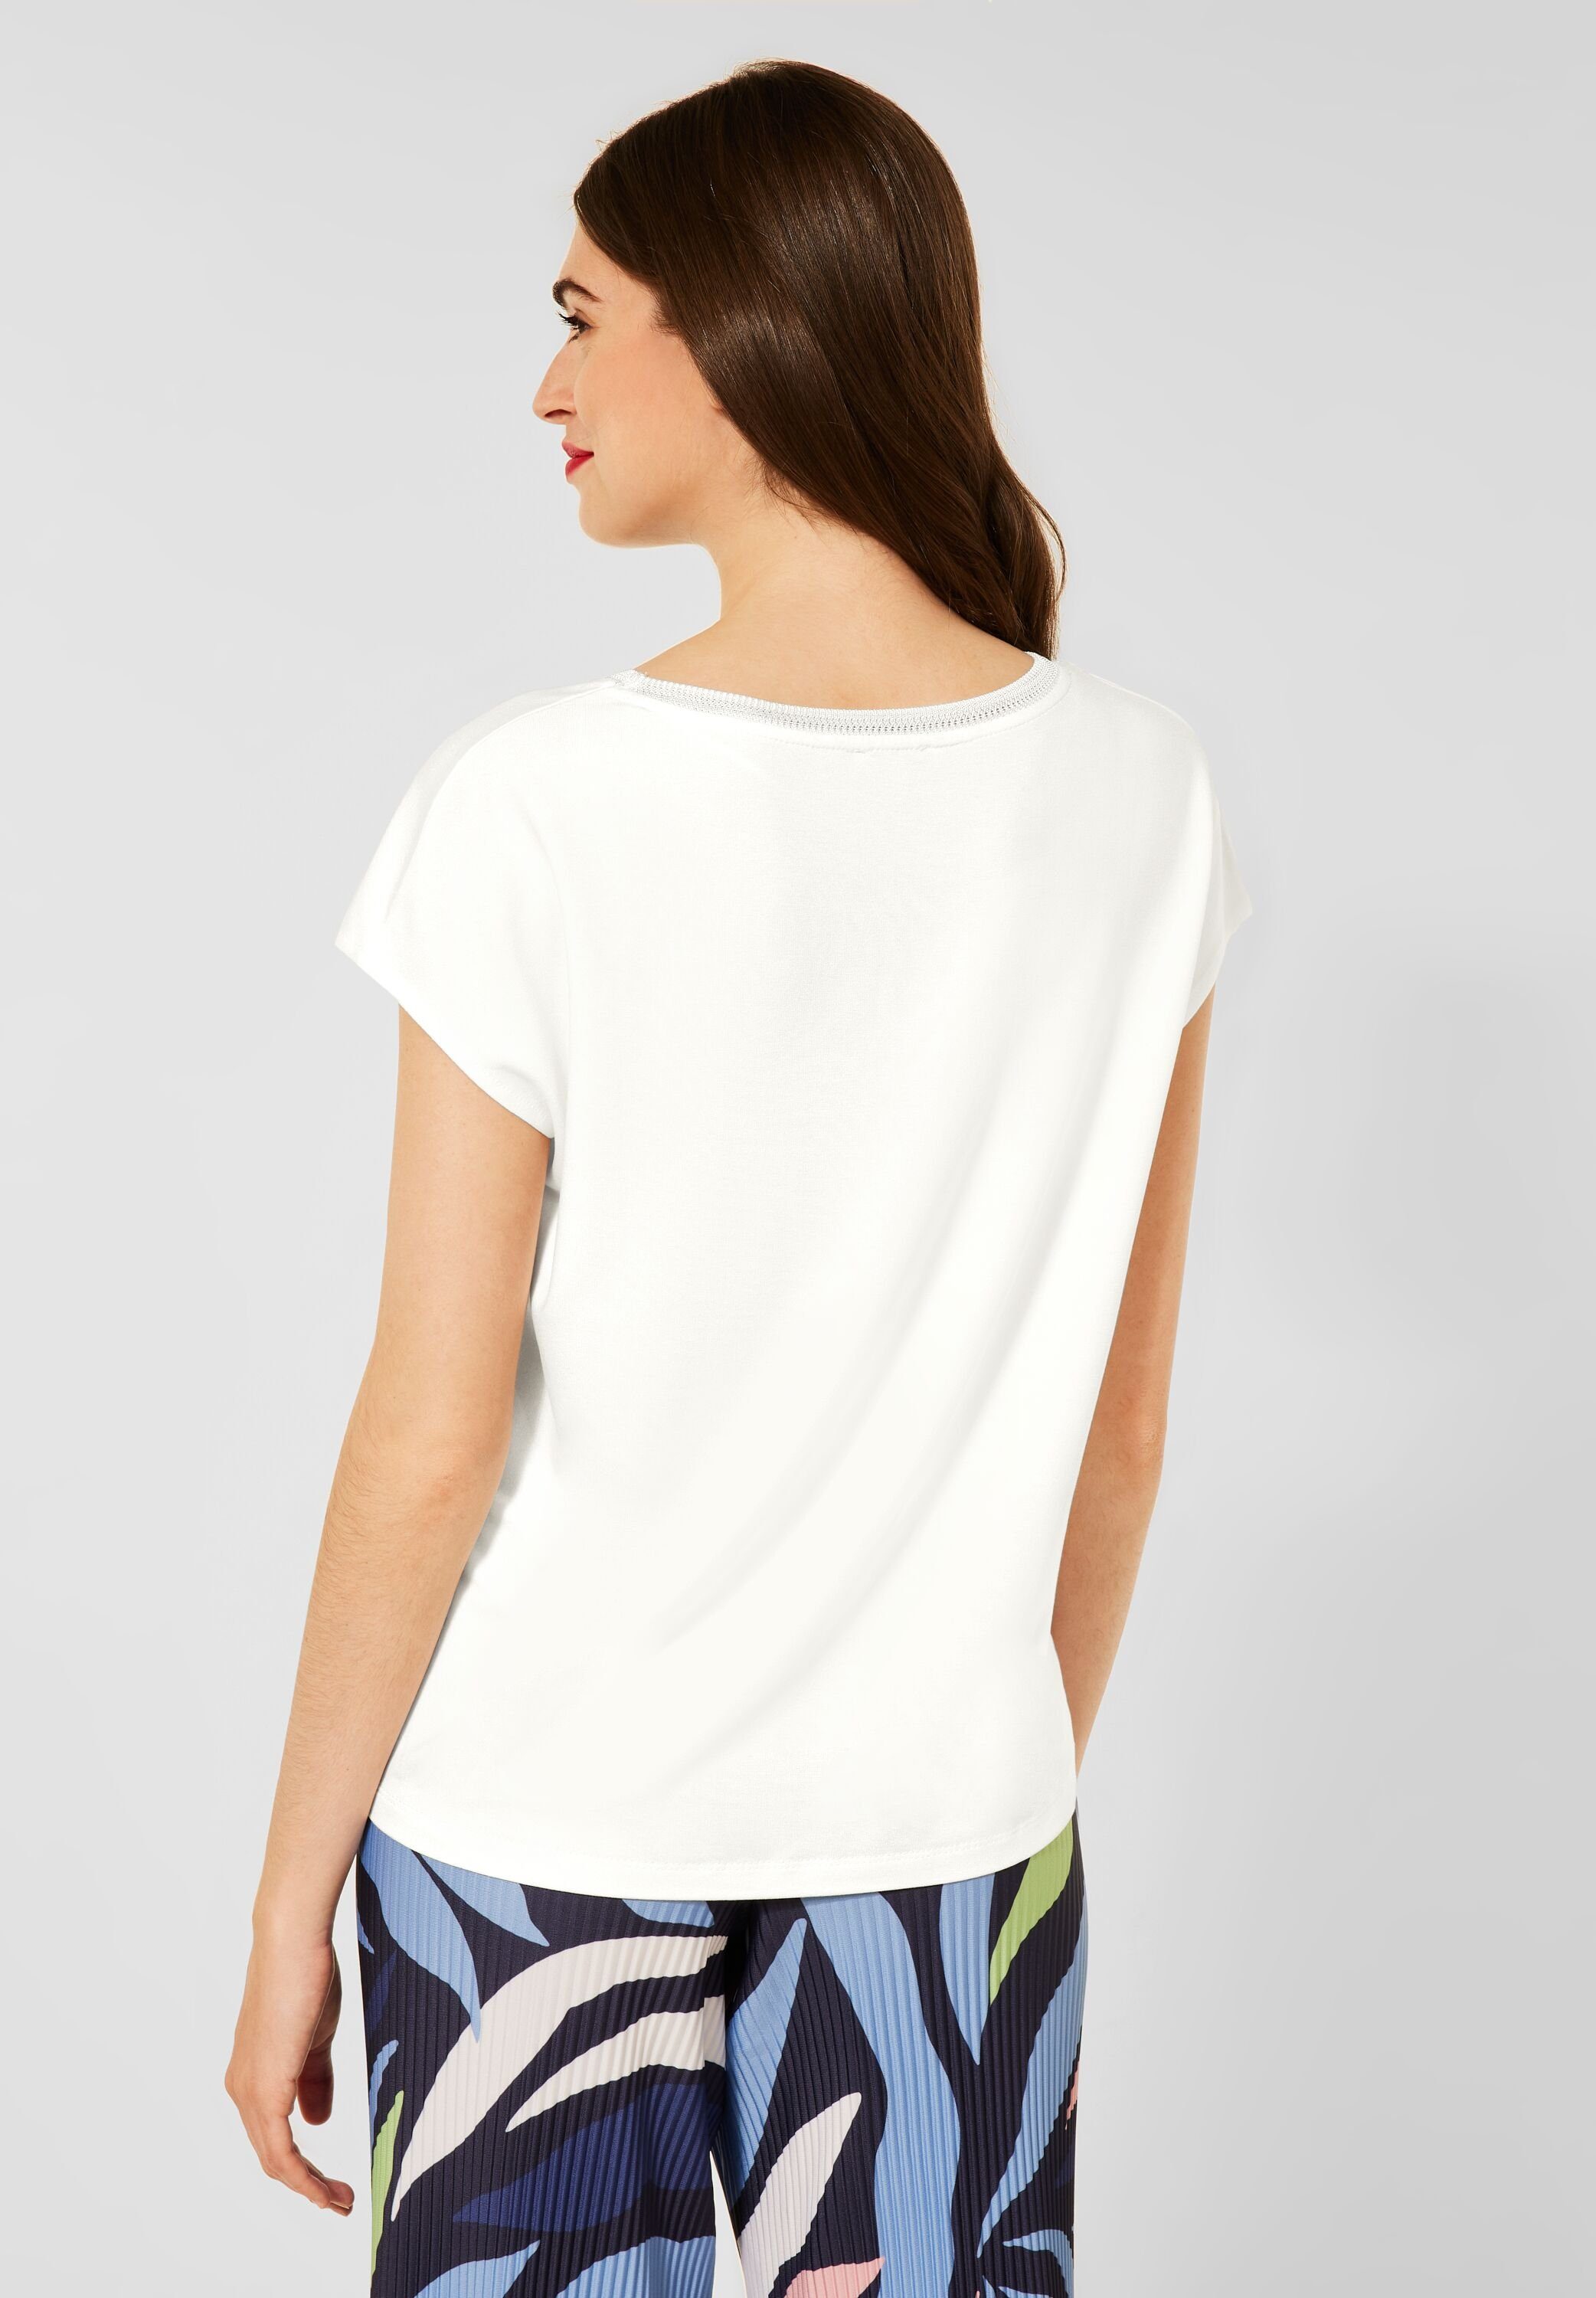 STREET ONE in Street (1-tlg) mit Shirt T-Shirt Off White T Rippdetail One Rippstrickdetail